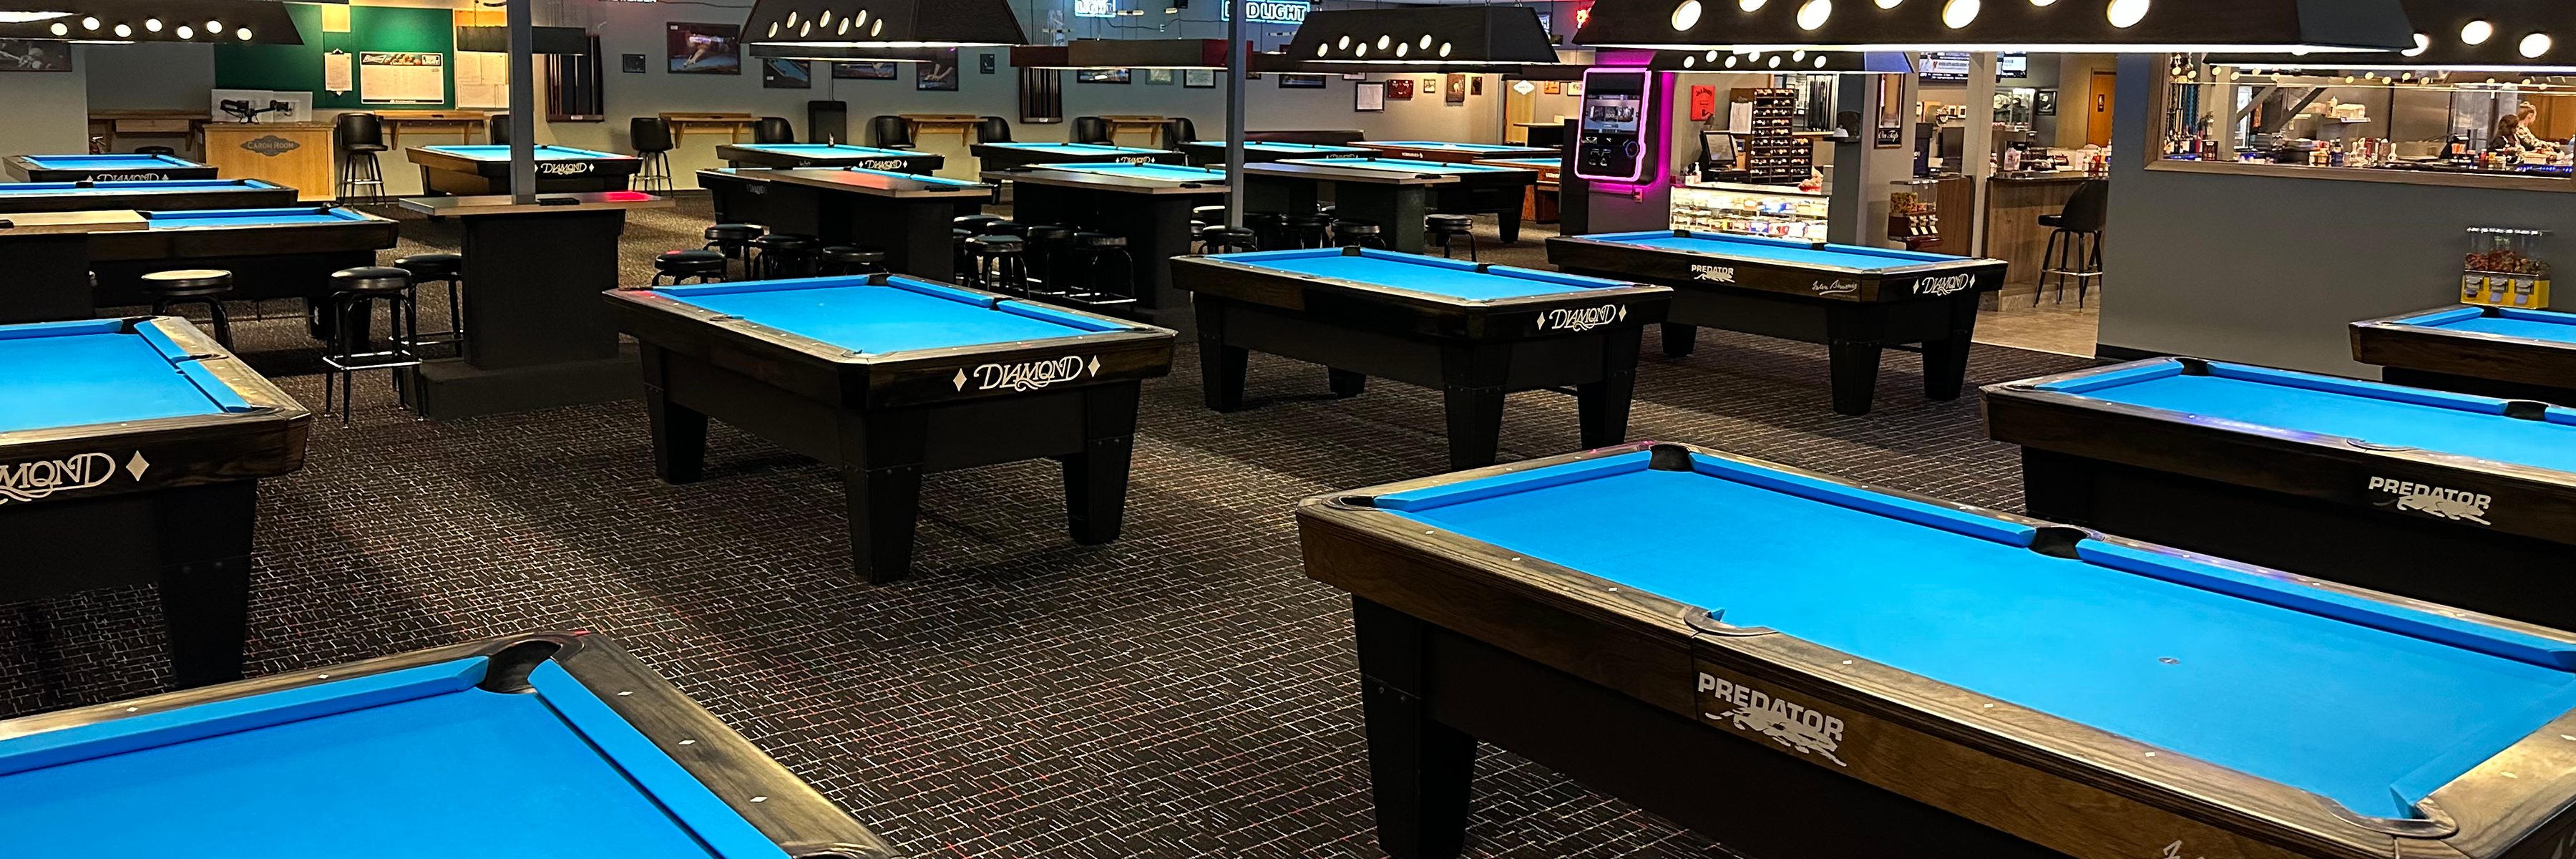 The Carom Room is a premier pool room providing an exceptional experience with Diamond billiard tables, tournaments, leagues, a full bar, and food.